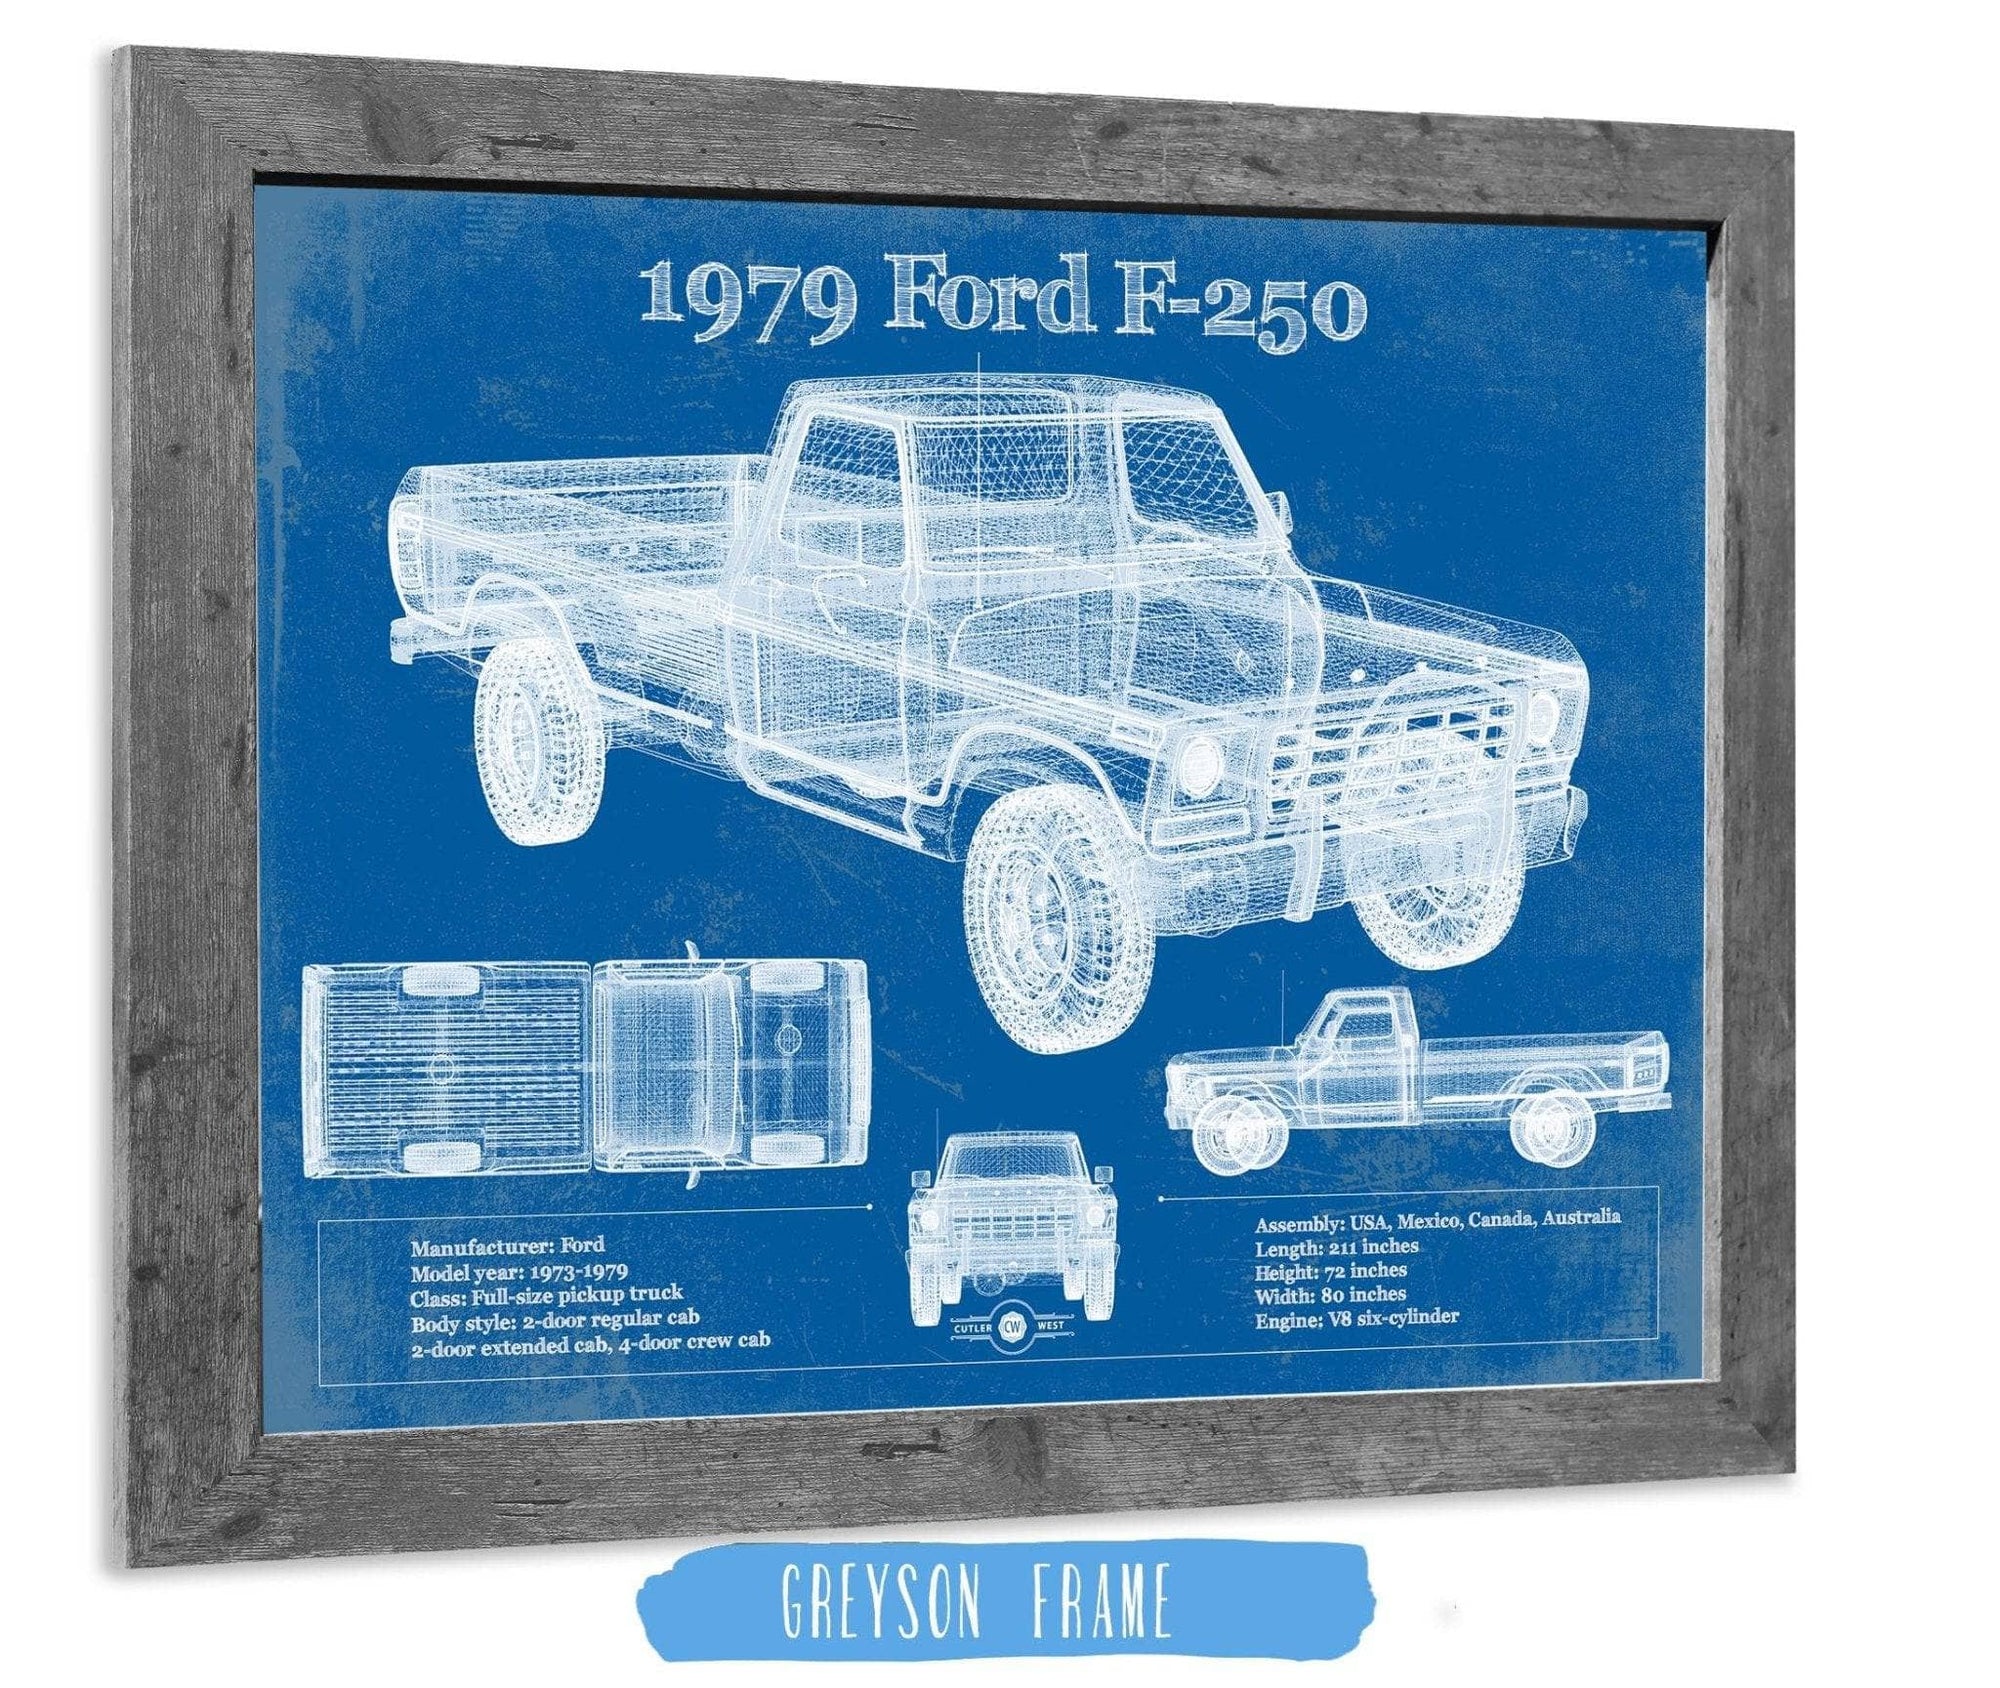 Cutler West Ford Collection 14" x 11" / Greyson Frame 1979 Ford F 250 Vintage Blueprint Auto Print 933311117_41418